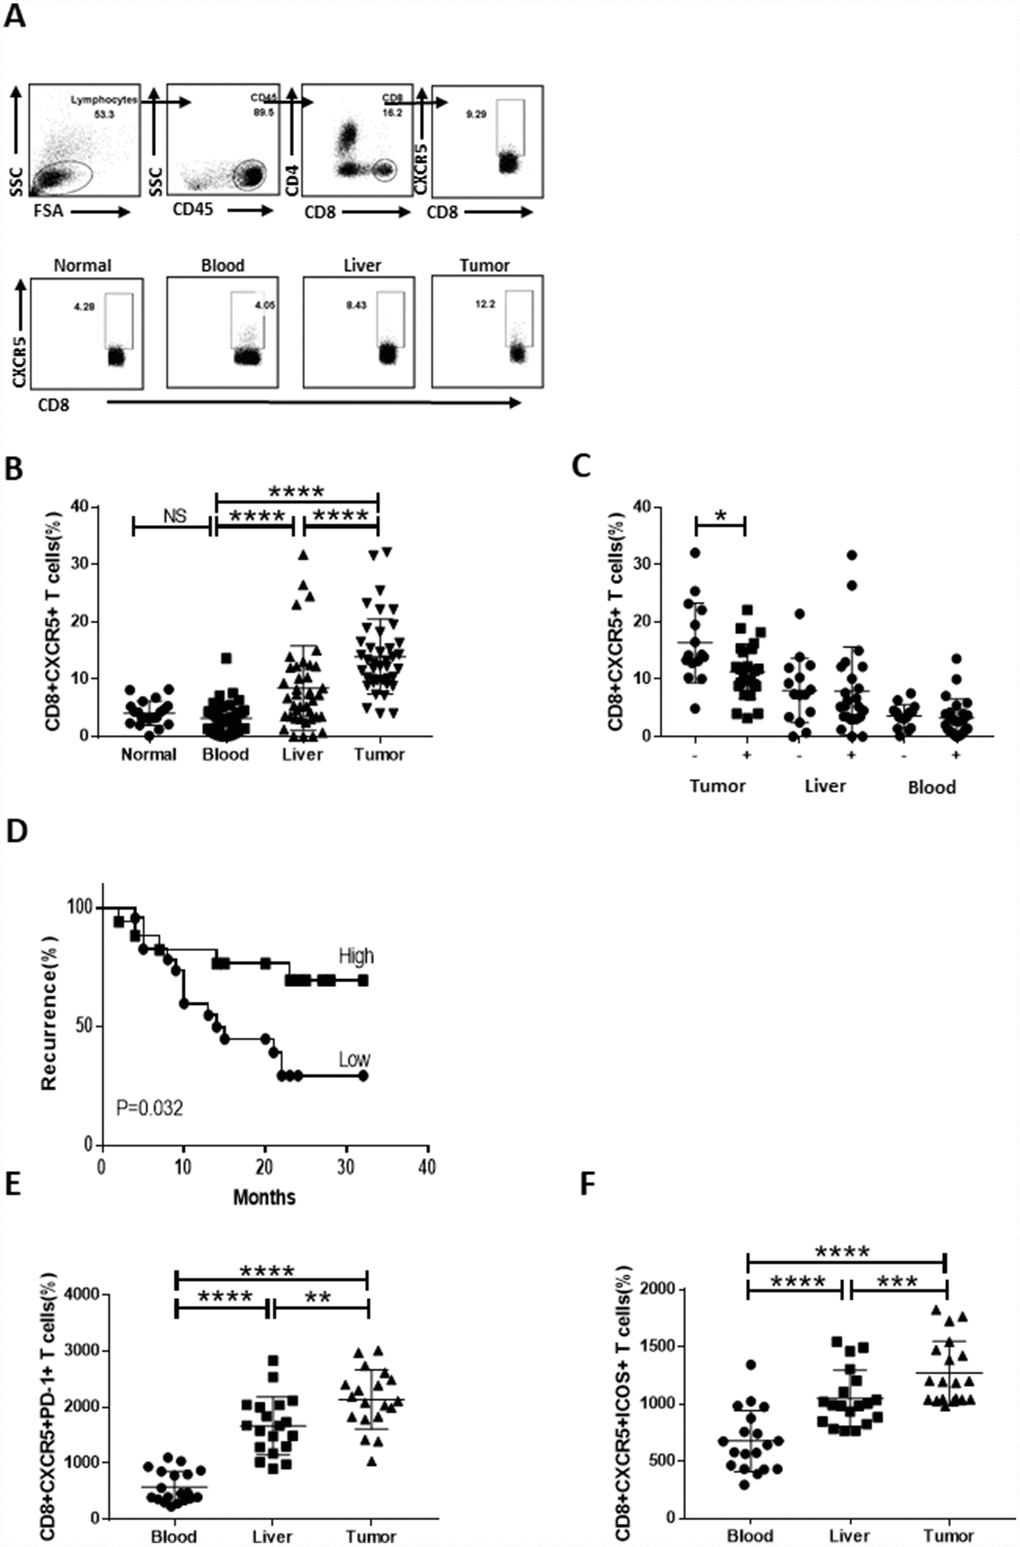 Strong infiltration of CD8+CXCR5+ T cells into HCC tumors predicts a better prognosis. Fresh samples were stained with anti-CD8, anti-CXCR5, anti-PD-1 and anti-ICOS antibodies. (A–B) Following gating of CD8+ T cells, the frequencies of CD8+CXCR5+ T cells from healthy PBMCs (n=20), and matched HCC tumor tissue, peritumoral liver tissue and PBMC samples (n=40) were analyzed. (A) One representative experiment is shown. (C) Association of tumor-infiltrating CD8+CXCR5+ T cells with microvascular invasion (n=25 for positive, n=15 for negative) is shown. (B–C) The data indicate the median with the interquartile range. (D) Patients were divided into two groups (Low/High) based on the median of the tumor-infiltrating CD8+CXCR5+ T cell percentages. The early recurrence rate was compared between the two groups using the log-rank test. (E–F) PD-1 and ICOS expression by CD8+CXCR5+ T cells differed among tumor tissue and matched peritumoral tissues and peripheral blood (n=19). The data indicate the median with the interquartile range. *PPP****P0.0001 determined using the Mann-Whitney U test (B, C, E and F).